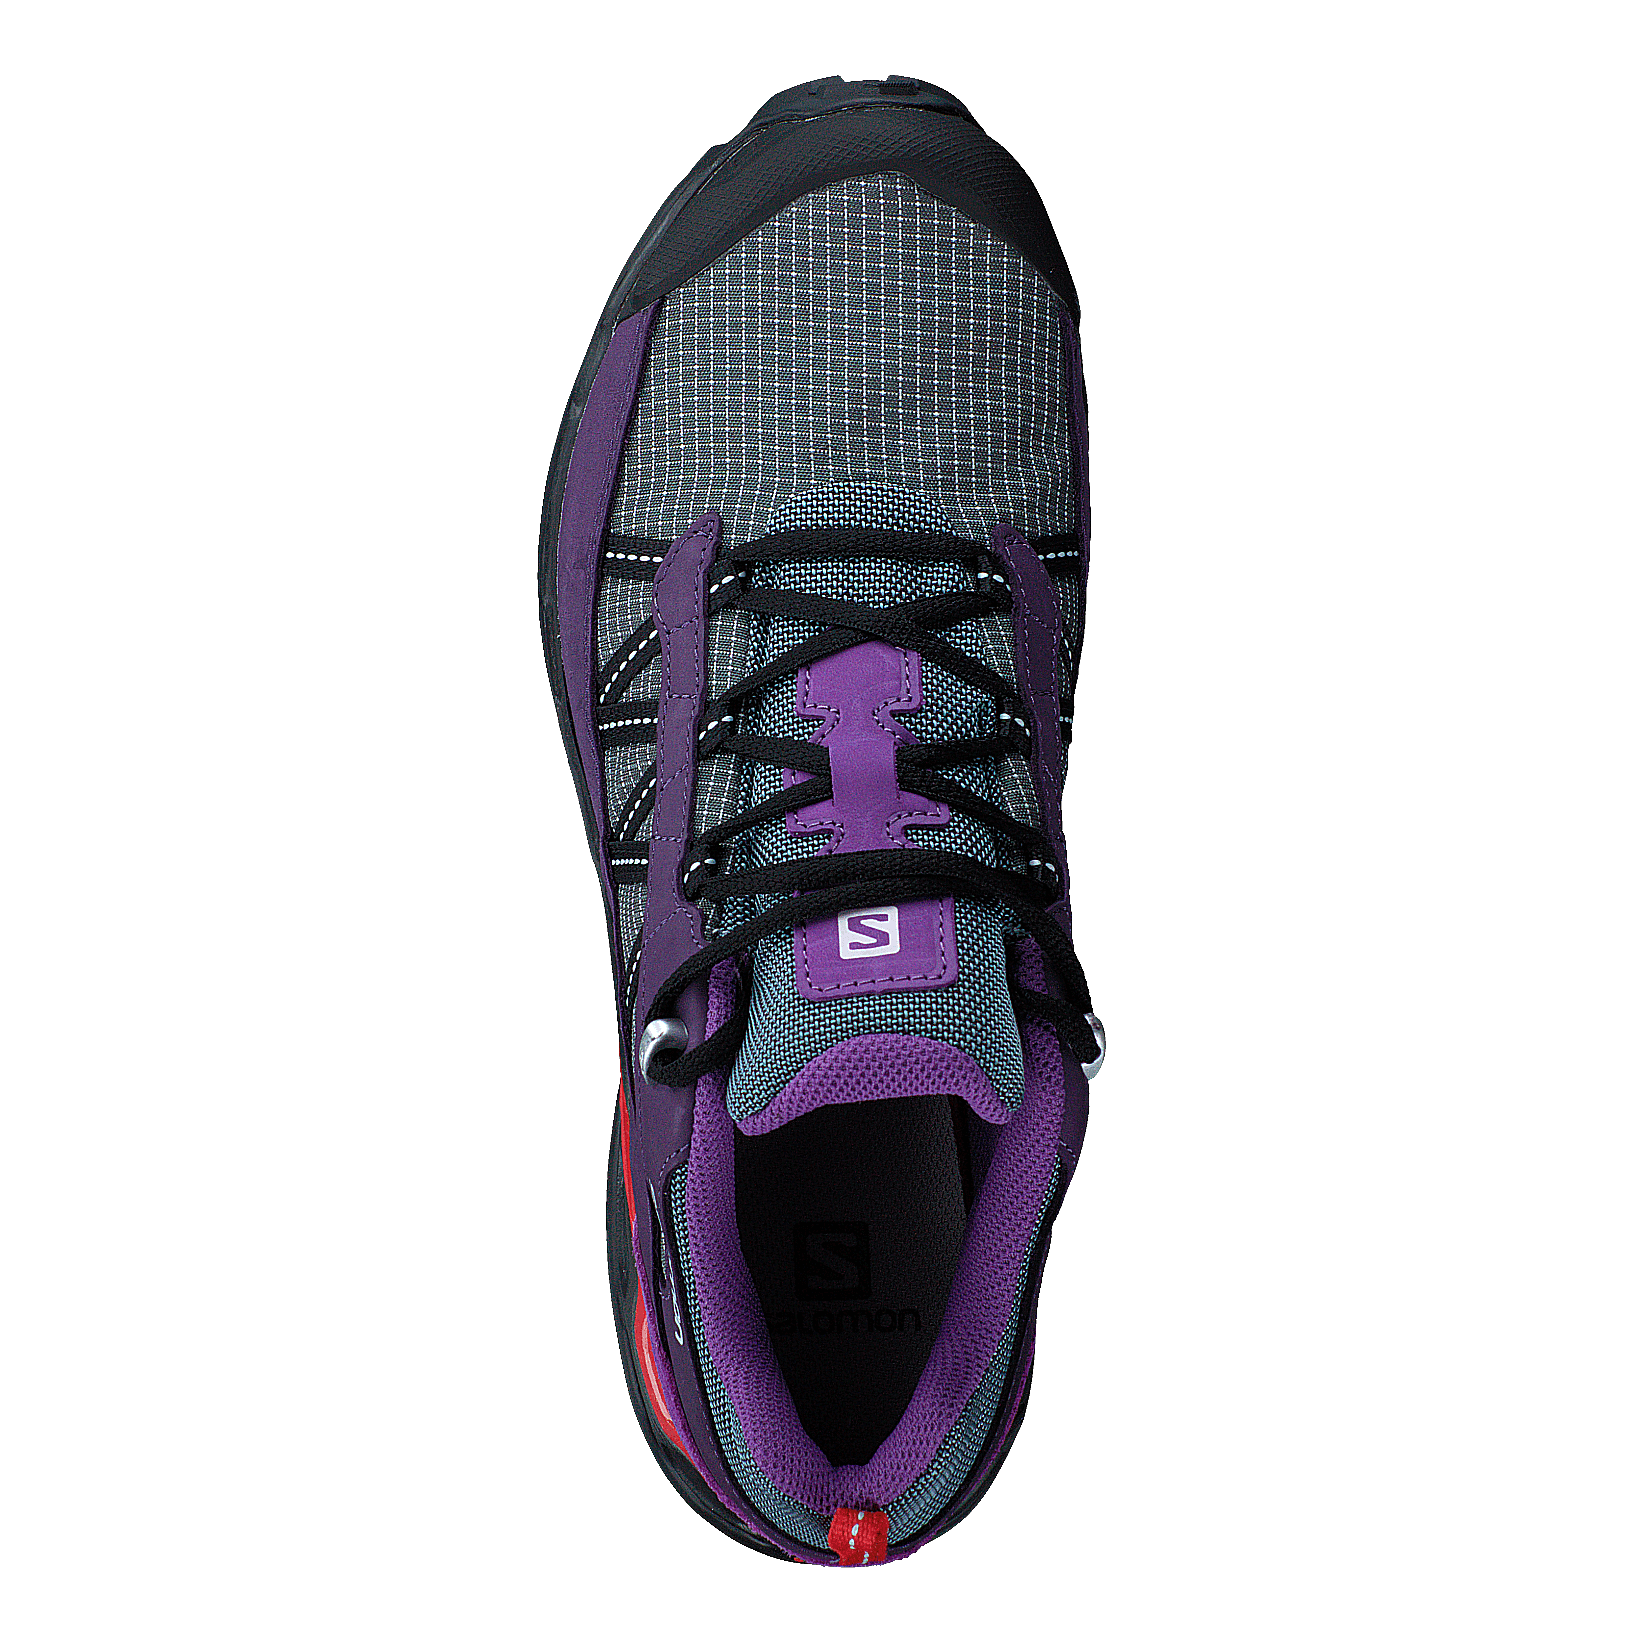 Shoes Shelter Low Ltr Stormy Weather/grape/goji Berr